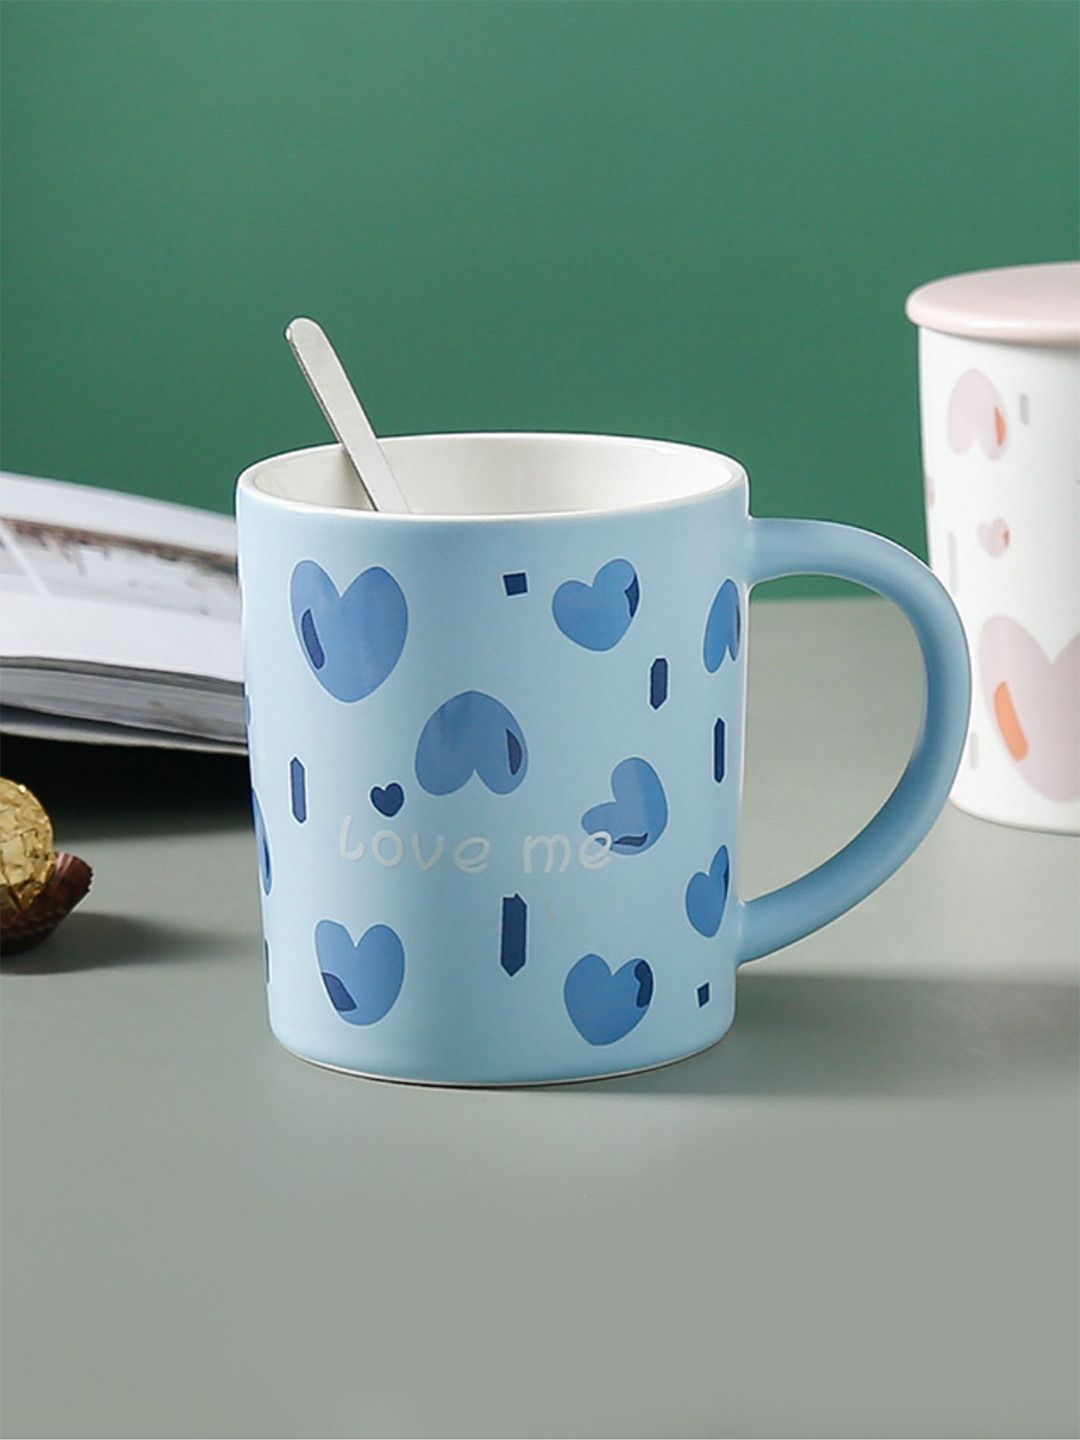 Nestasia Blue and White Love Me Printed Mug With Lid & Spoon Price in India